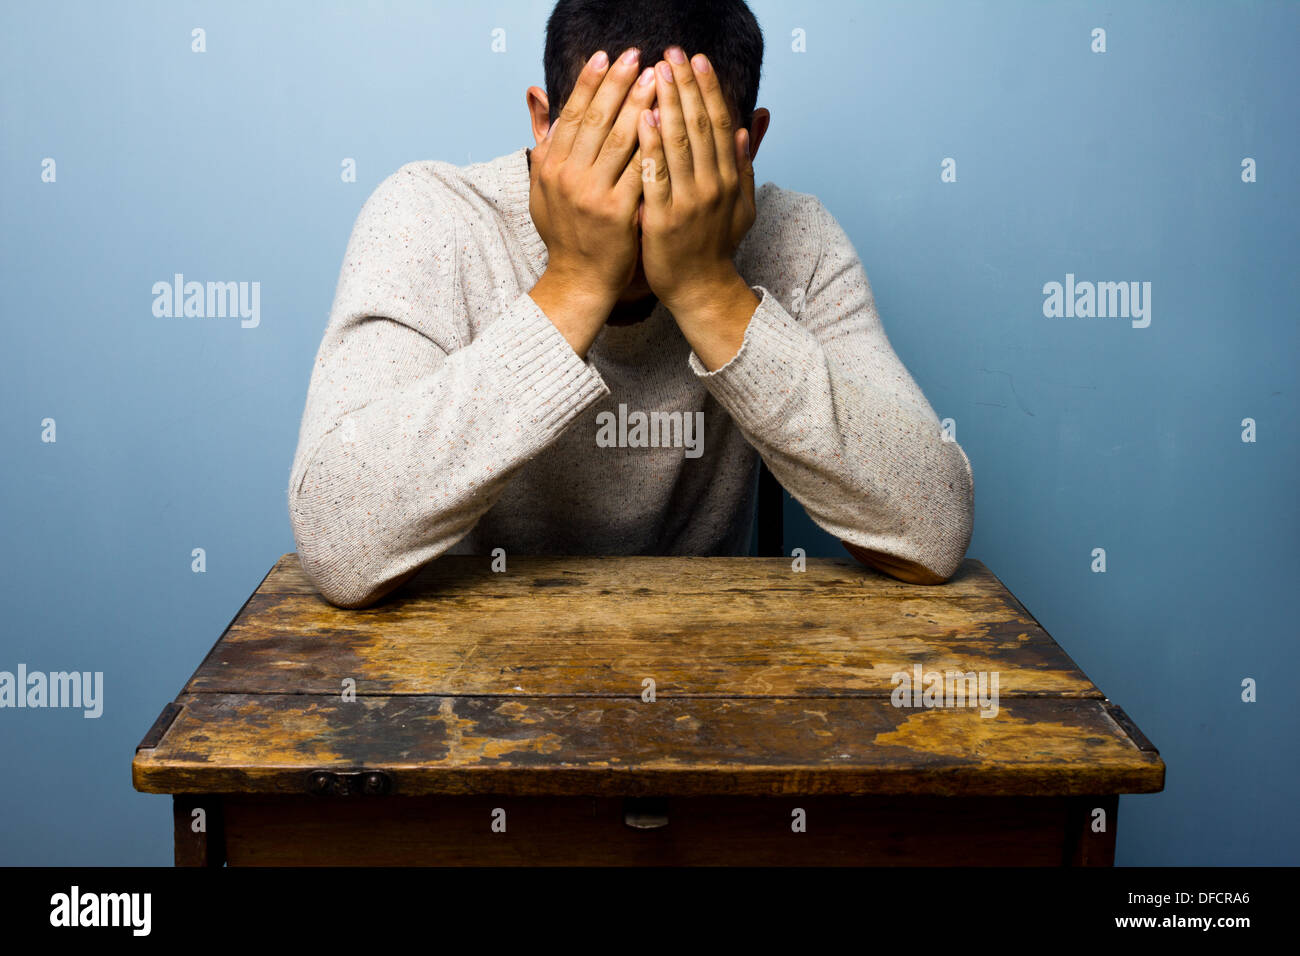 Upset man at desk is face palming Stock Photo